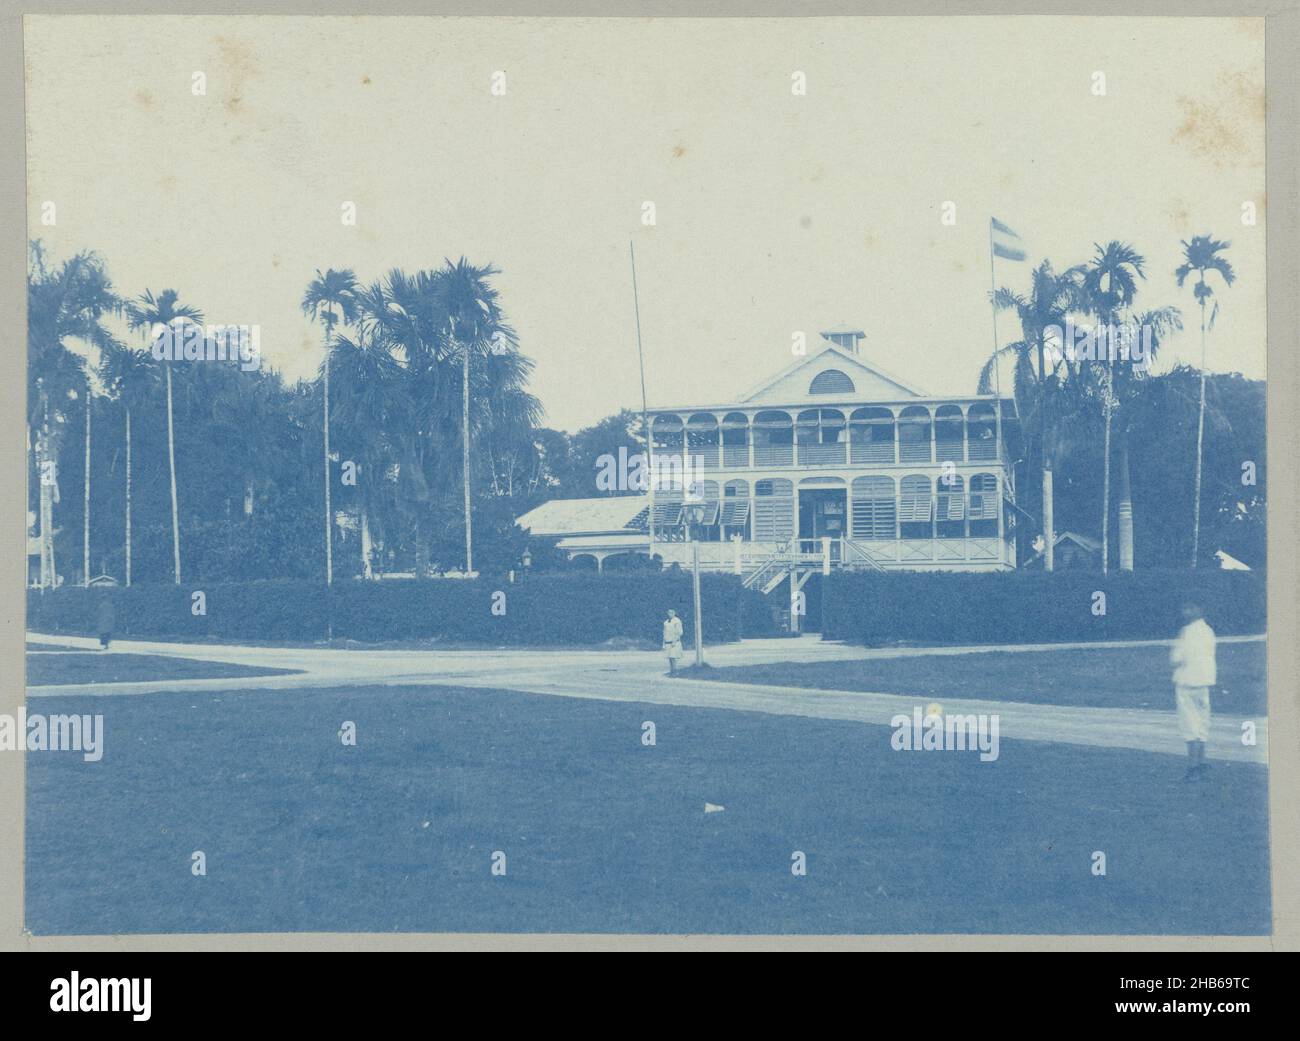 Park (title on object), View of society Het Park in Paramaribo. Part of the photo album Souvenir de Voyage (part 2), about the life of the Doijer family in and around the plantation Ma Retraite in Suriname in the years 1906-1913., Hendrik Doijer (attributed to), Suriname, 1906 - 1913, photographic support, cyanotype, height 118 mm × width 161 mm Stock Photo